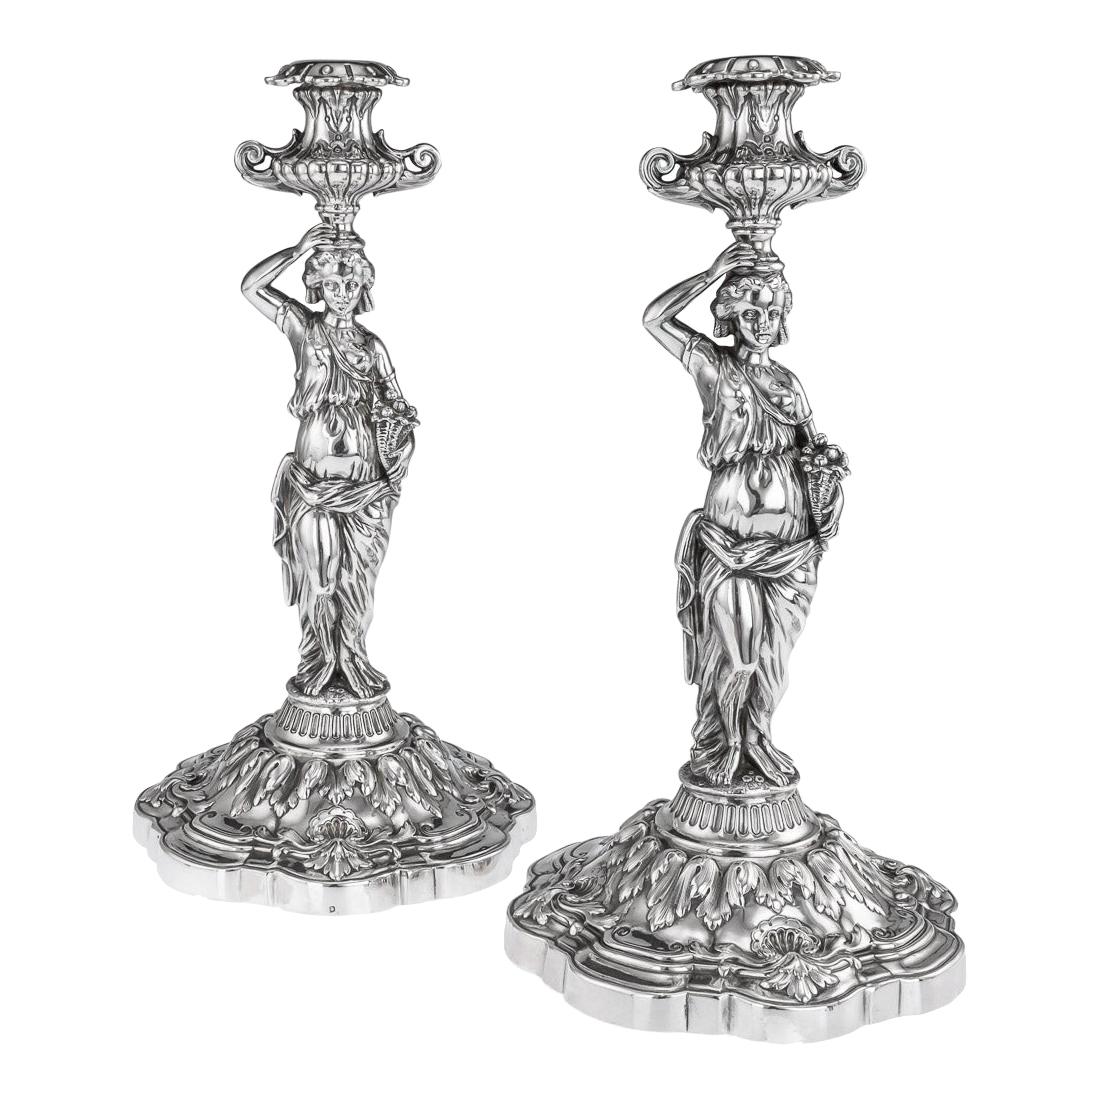 19th Century French Solid Silver Pair of Figural Candlesticks, Debain c.1880